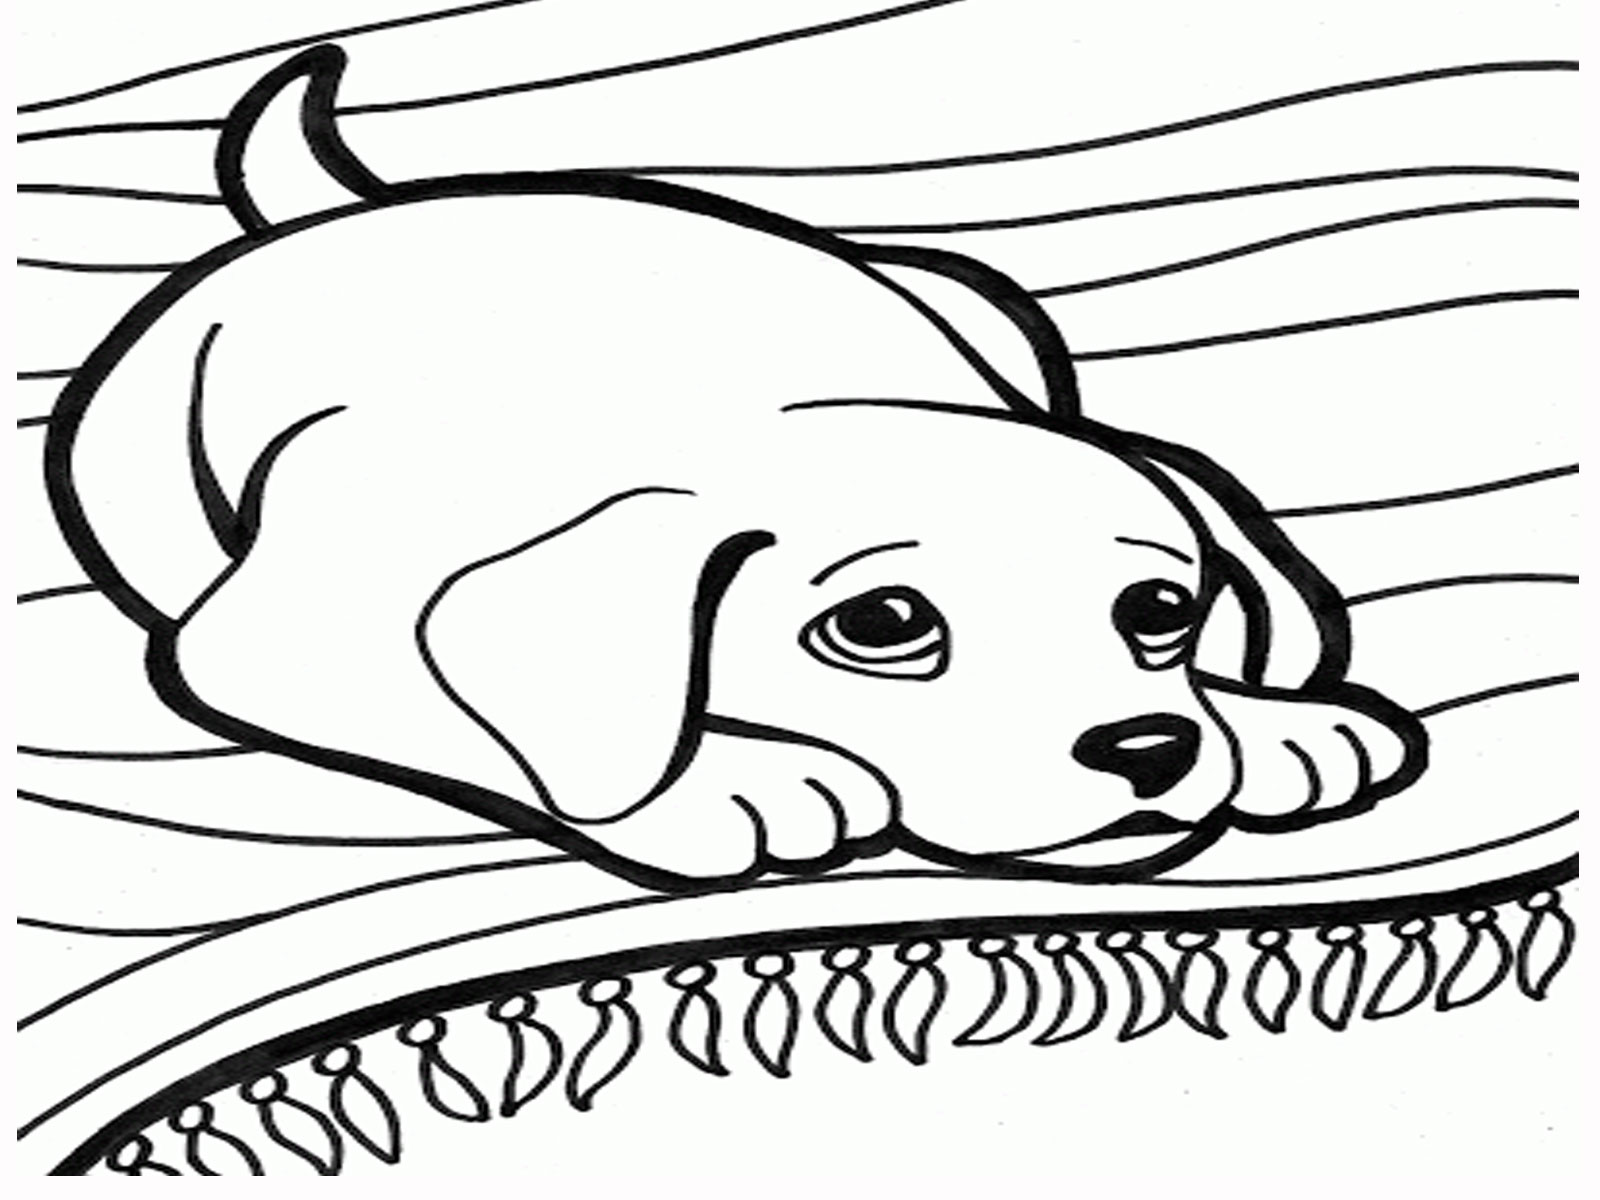 Best Cute Puppy Coloring Pages For Girls Image - Free Coloring Book Images